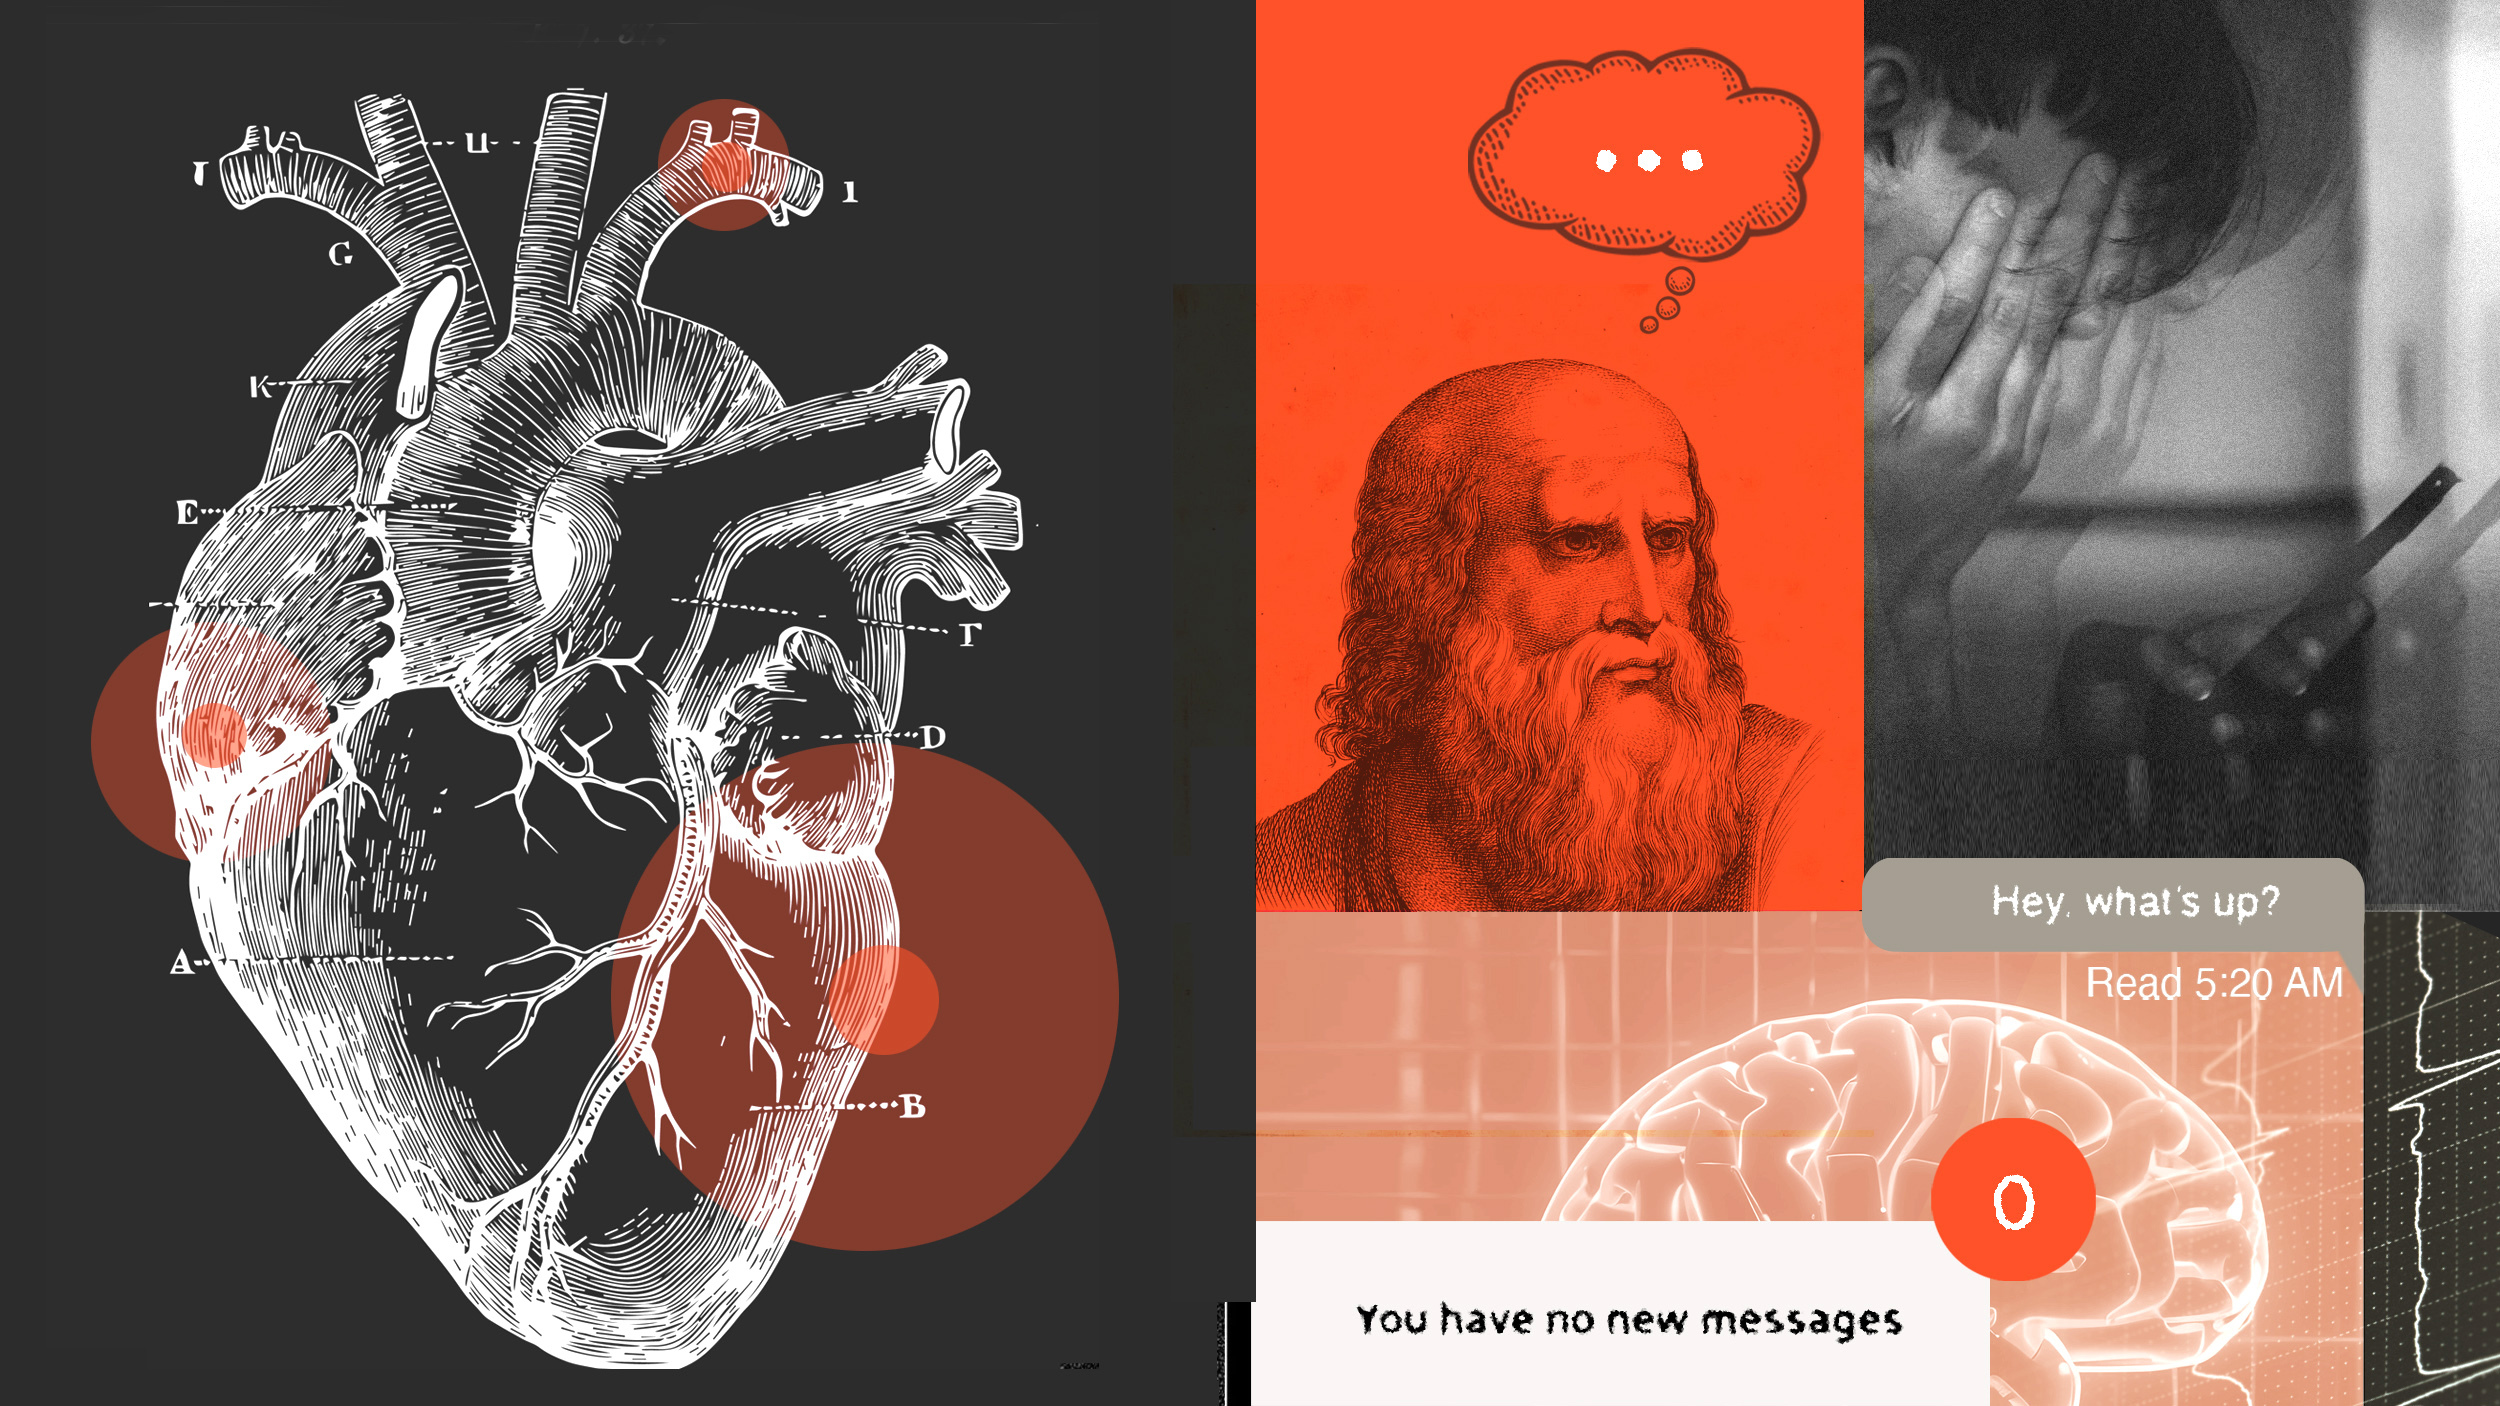 A collage of images featuring an anatomical drawing of a heart, a portrait of a bearded man embodying everyday philosophy, a brain illustration, and a smartphone showing an unread message notification.